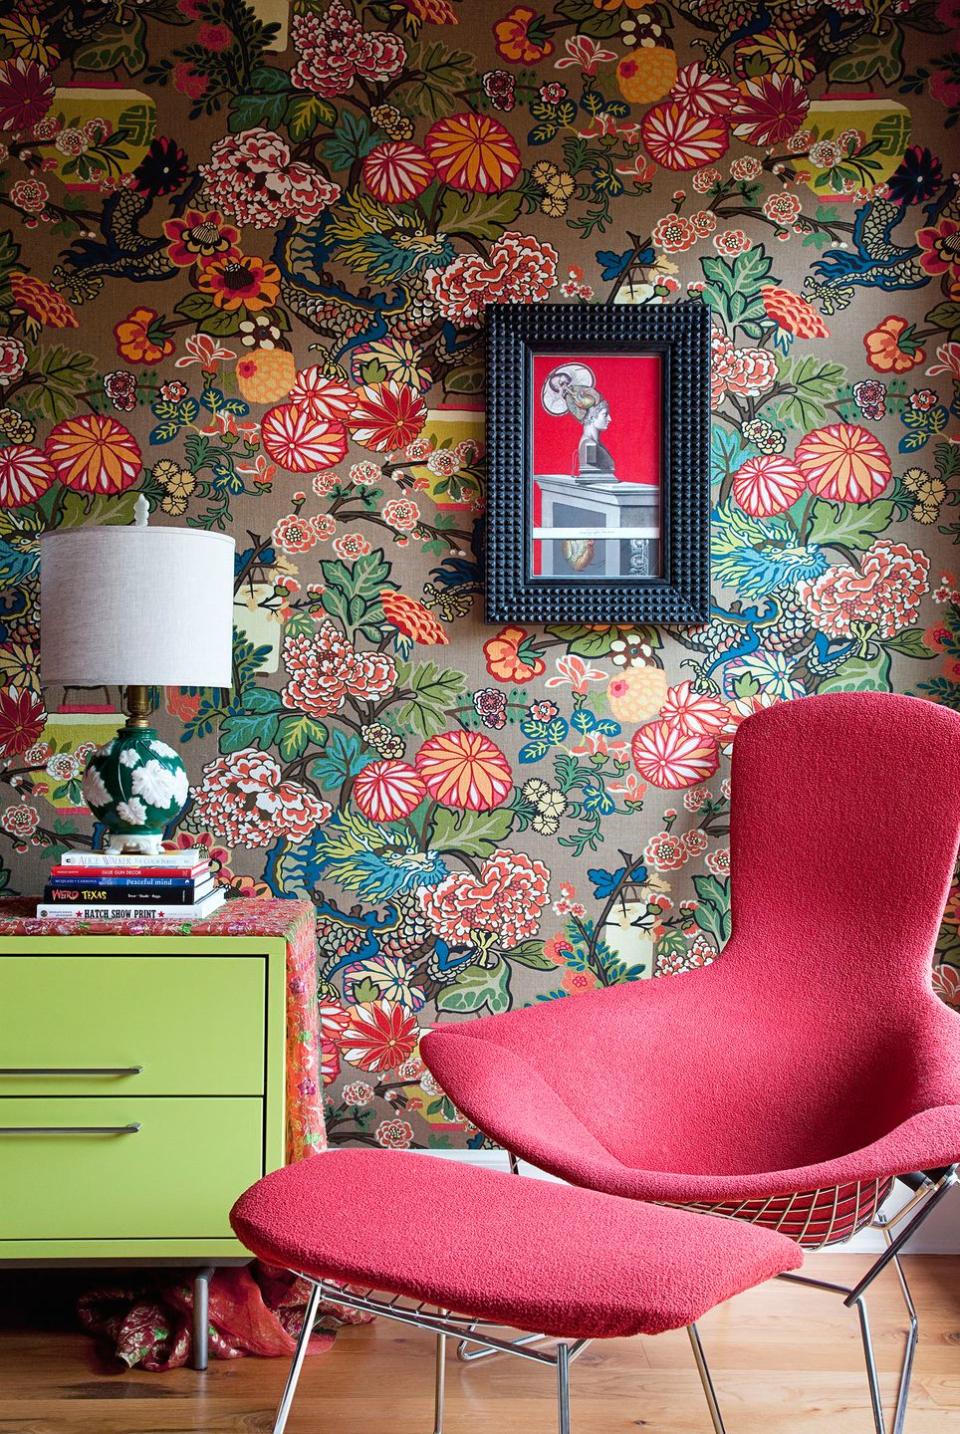 <p>If you don't have room for a whole library, you can create a one-of-a-kind reading space complete with vibrant wallpaper and colorful furniture.</p>